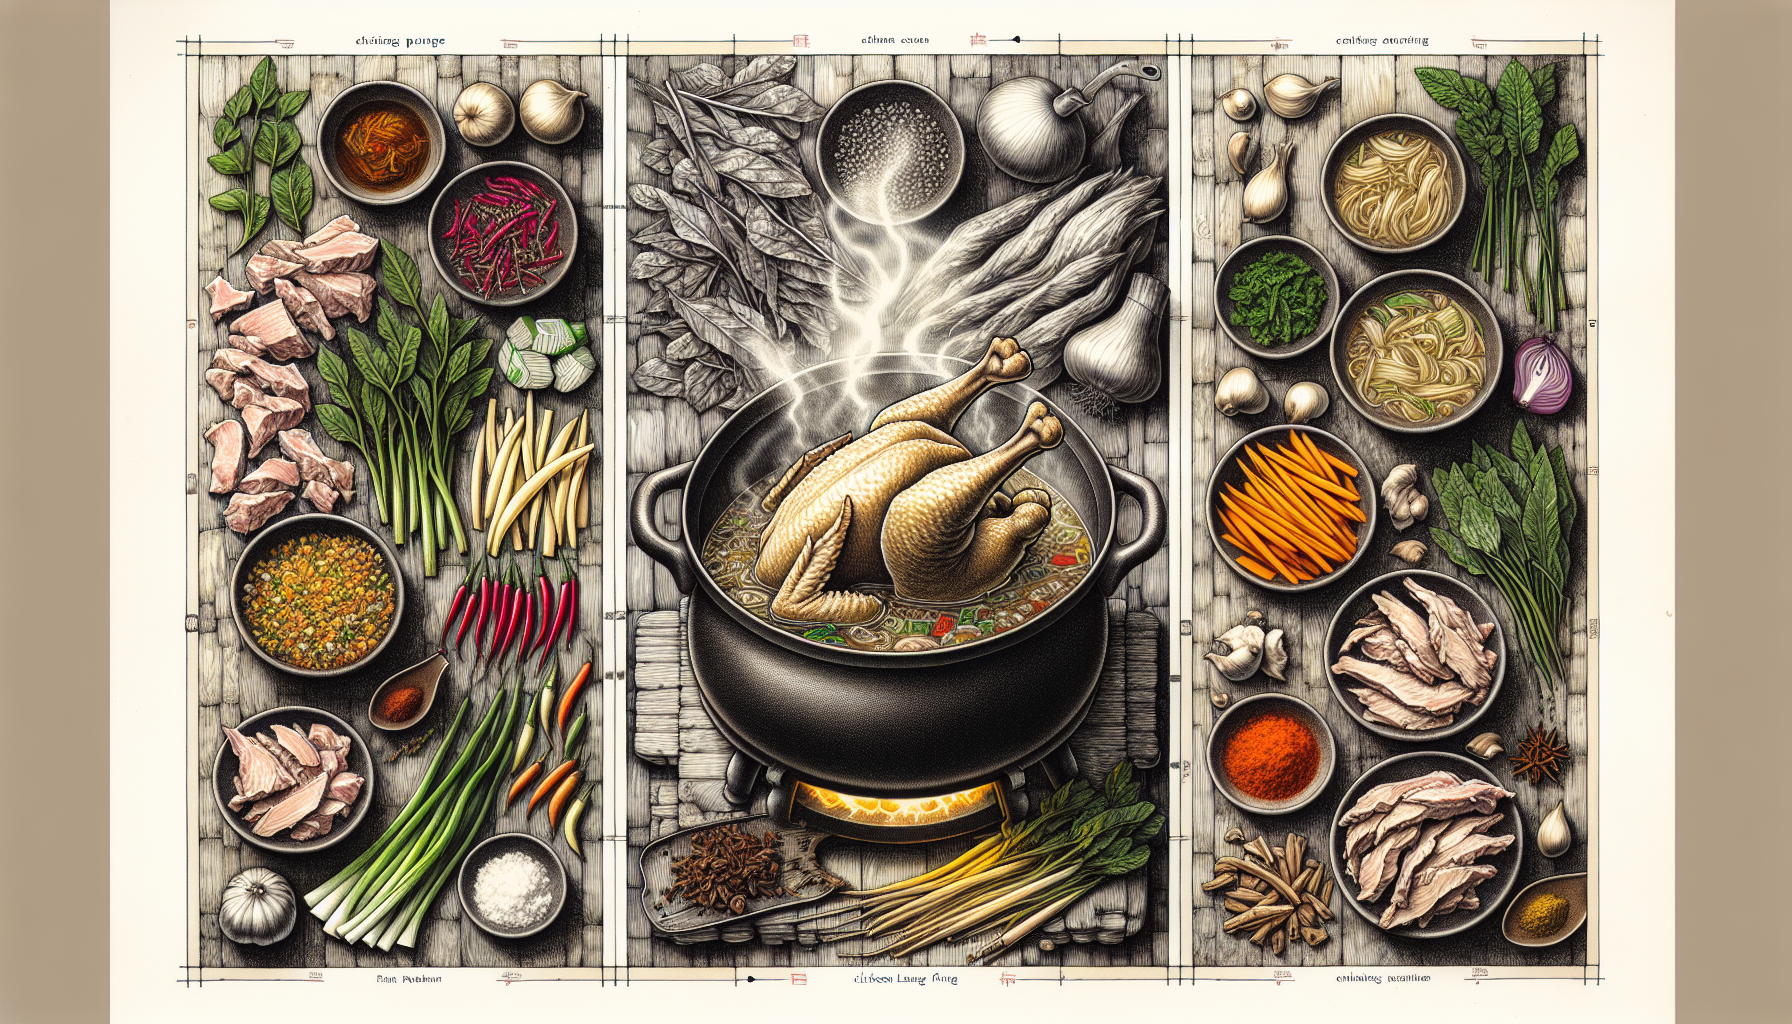 Artistic representation of the preparation of Chicken Lung Fung Soup